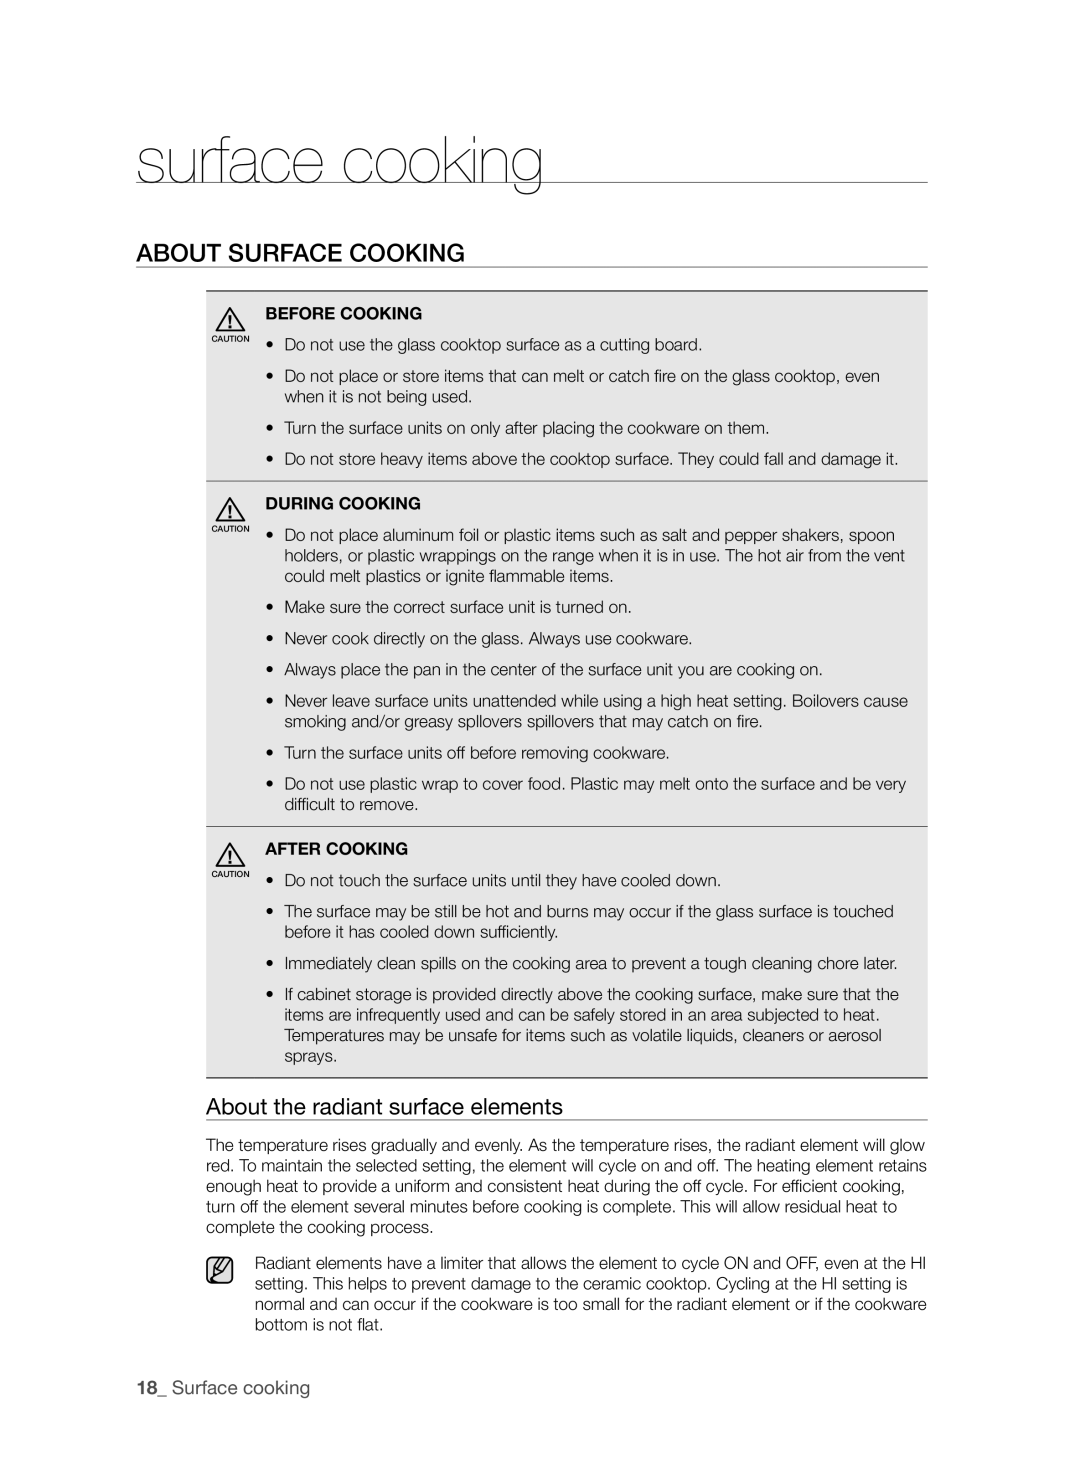 Samsung FE-R700WX, DG68-00294A user manual About surface cooking, Surface cooking 